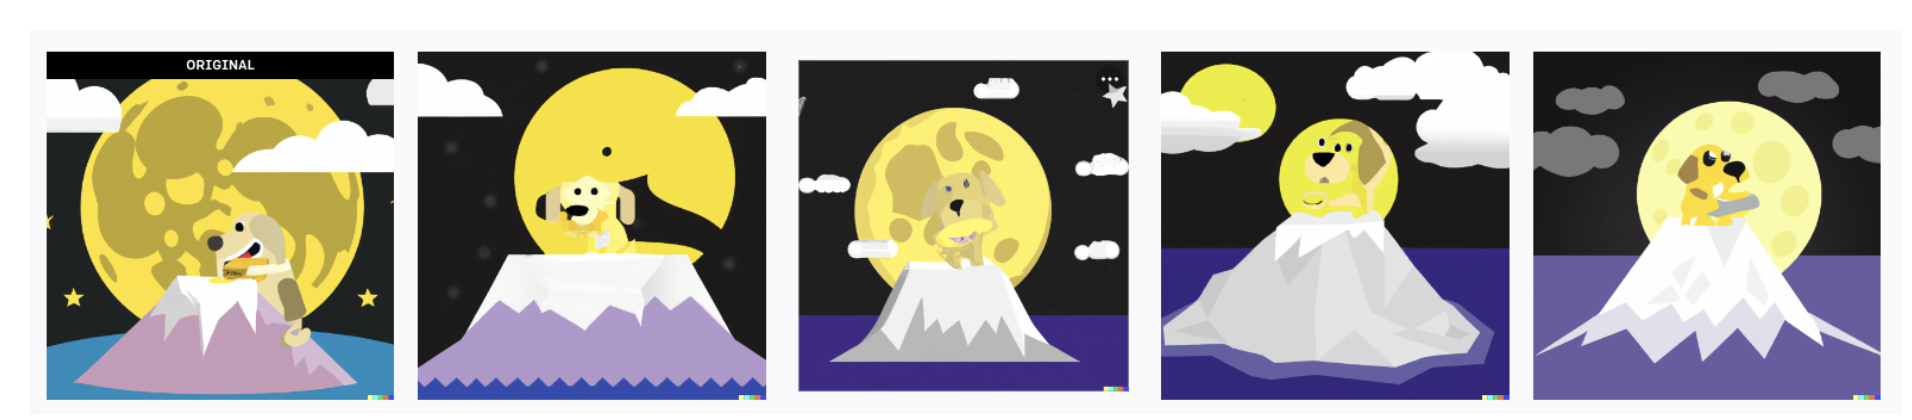 Picture 3 - Variations on the dog image - the original image is on the left with 4 variations on the right. all have the dog on a purple crater or a purple planet with the yellow moon behind him and some clouds in the sky.